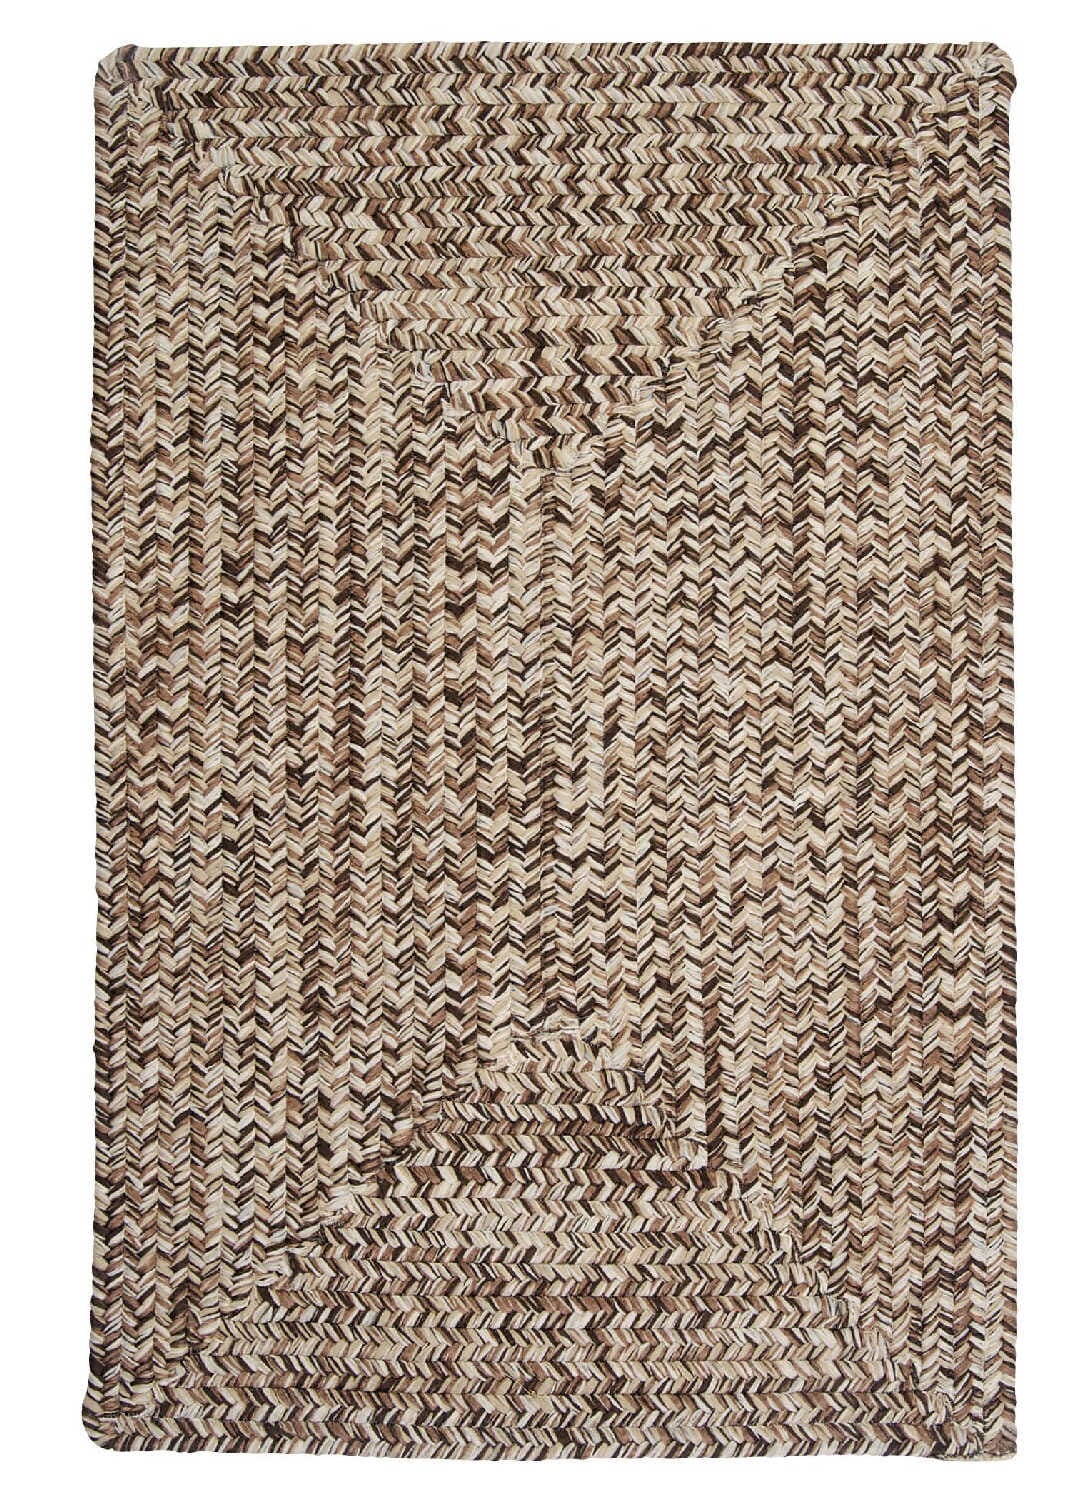 Colonial Mills Corsica Cc99 Weathered Brown / Brown / Neutral Area Rug